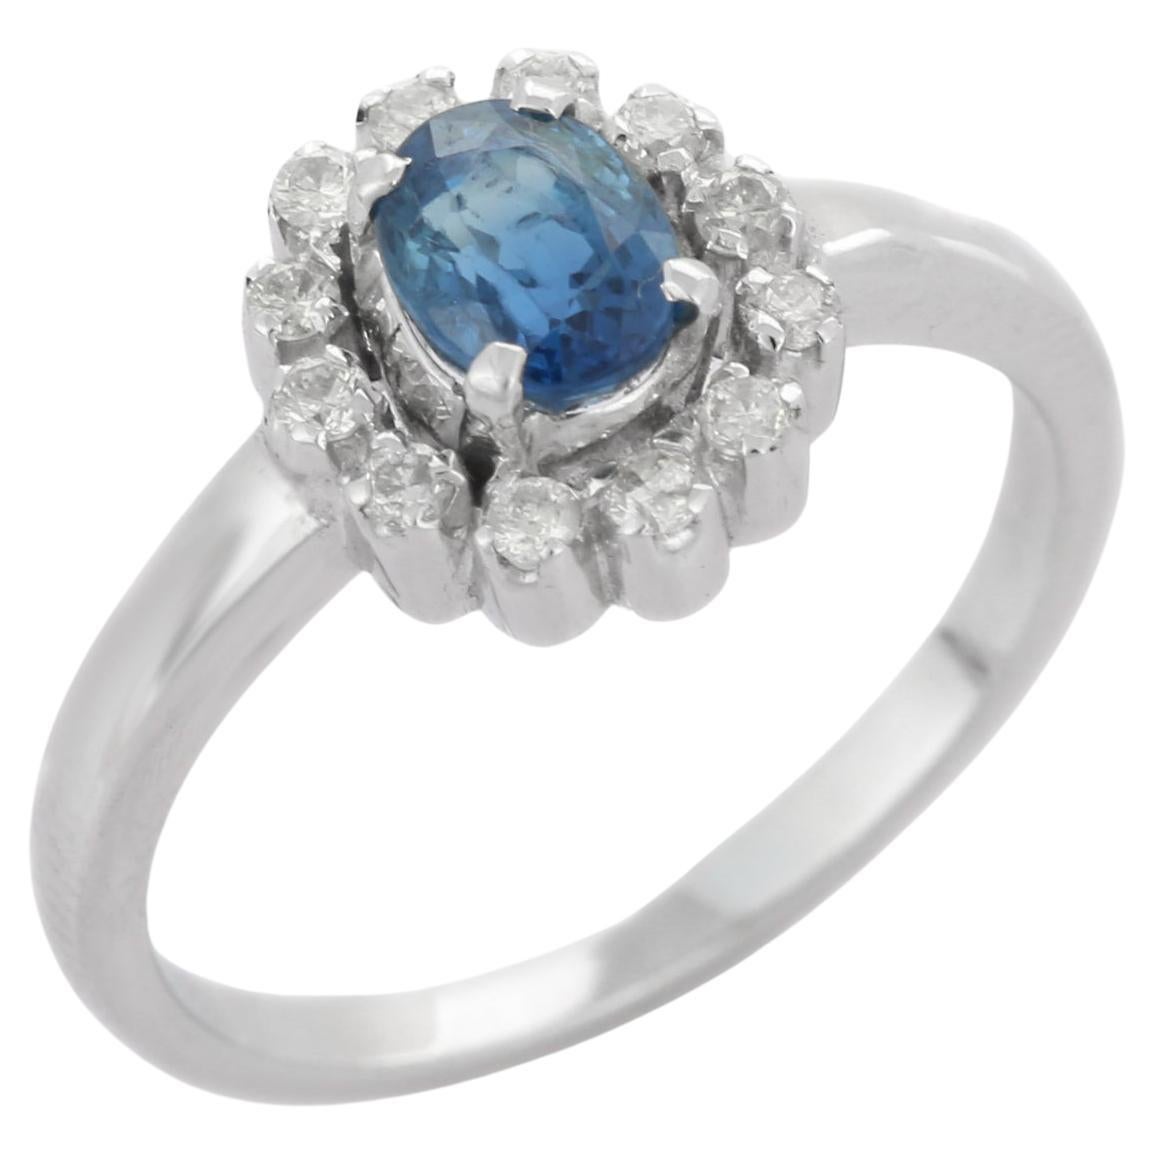 For Sale:  14K White Gold Halo Diamond and Sapphire Ring, Sapphire Diamond Halo Ring